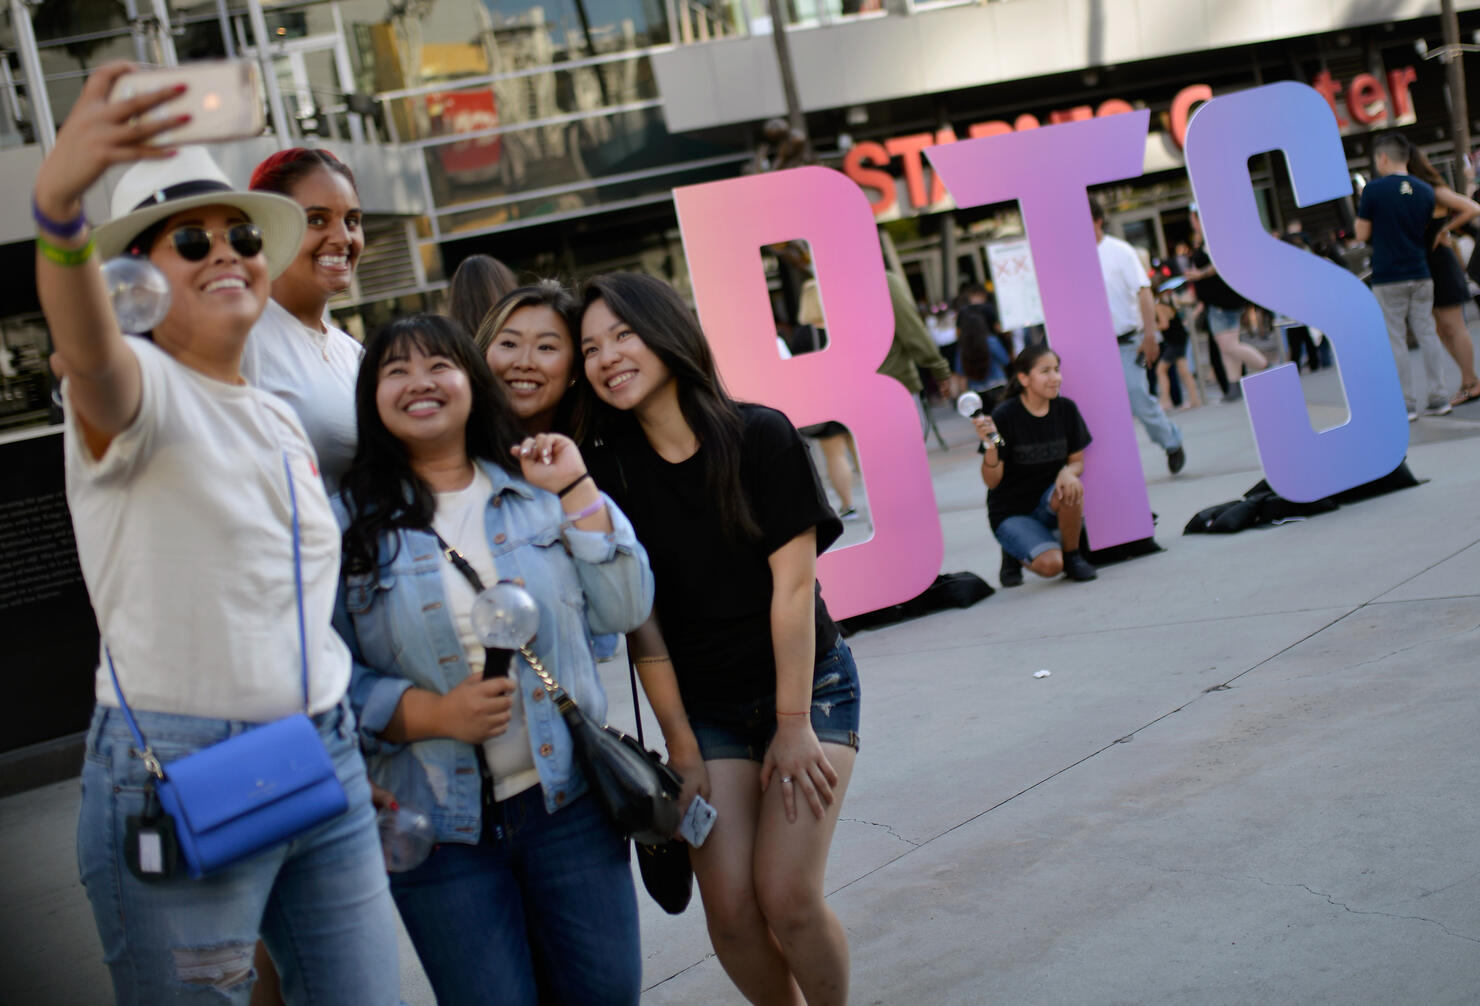 Fans Await The BTS Concert At Staples Center As Part Of The "Love Yourself" North American Tour